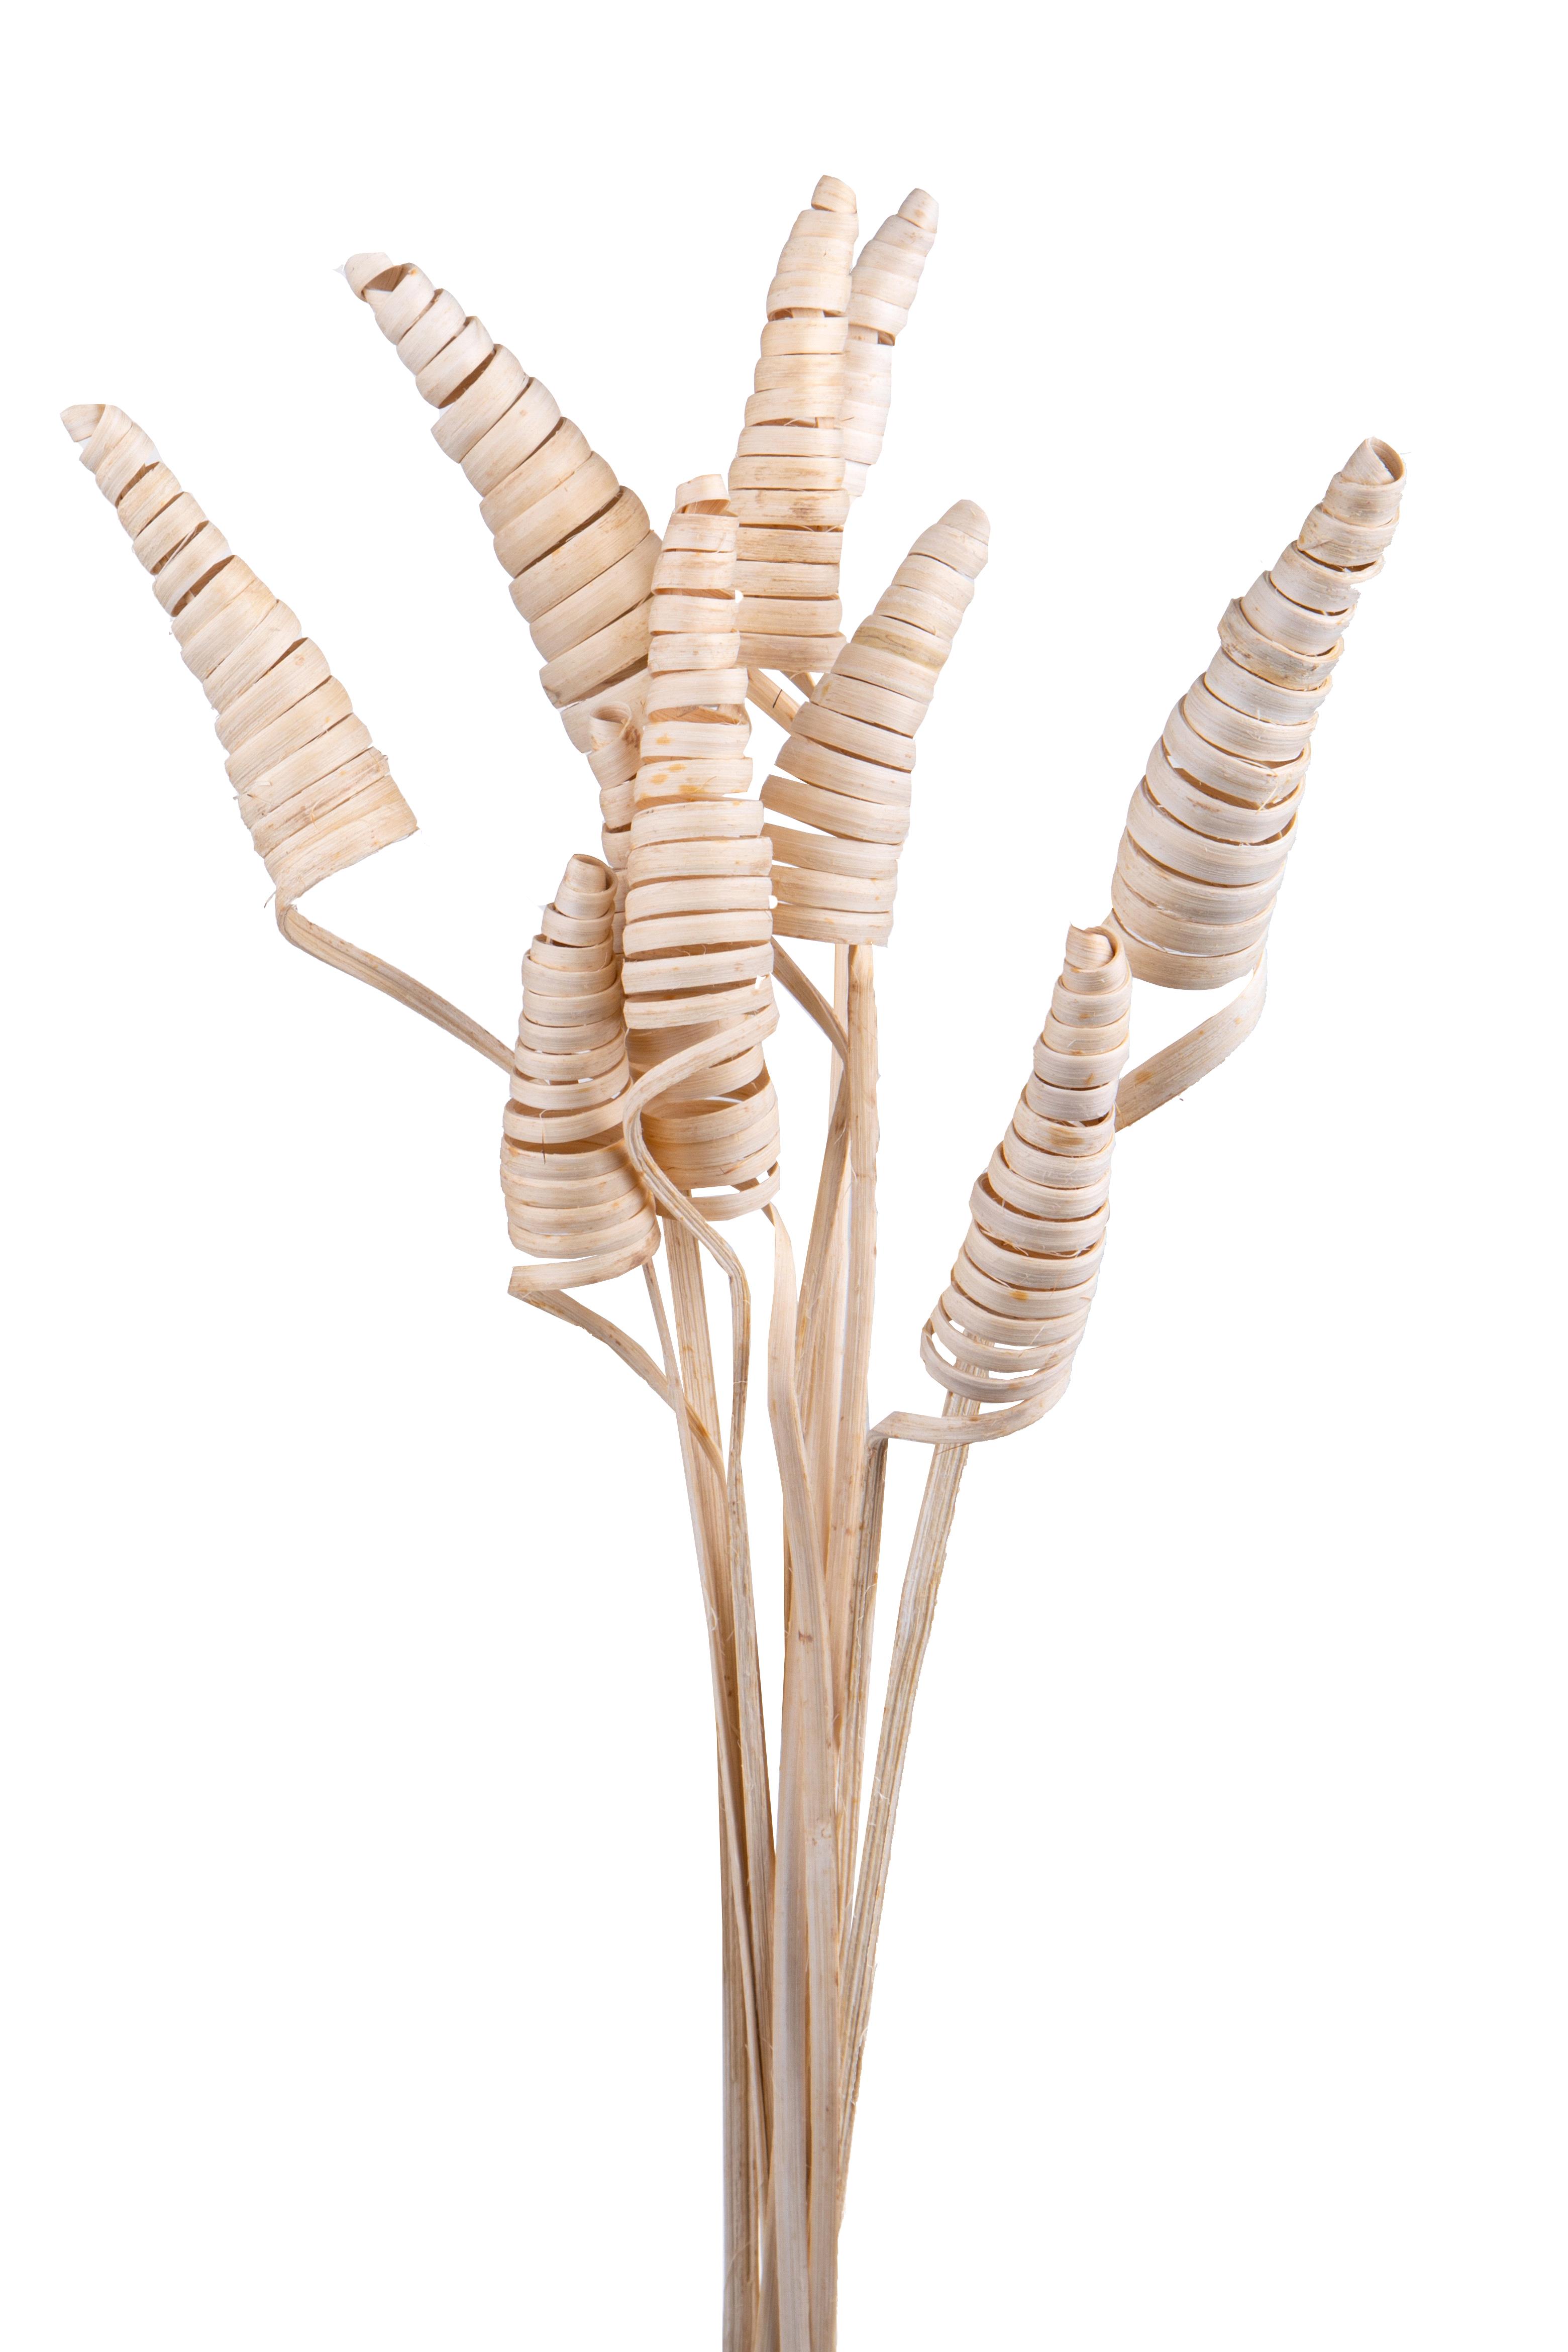 NATURAL PRODUCTS DRIED FLOWERS AND ERBS, EXOTICS AND DECORATION, GIUNCHI CONE 10 PZ 55 CM BIANCHI